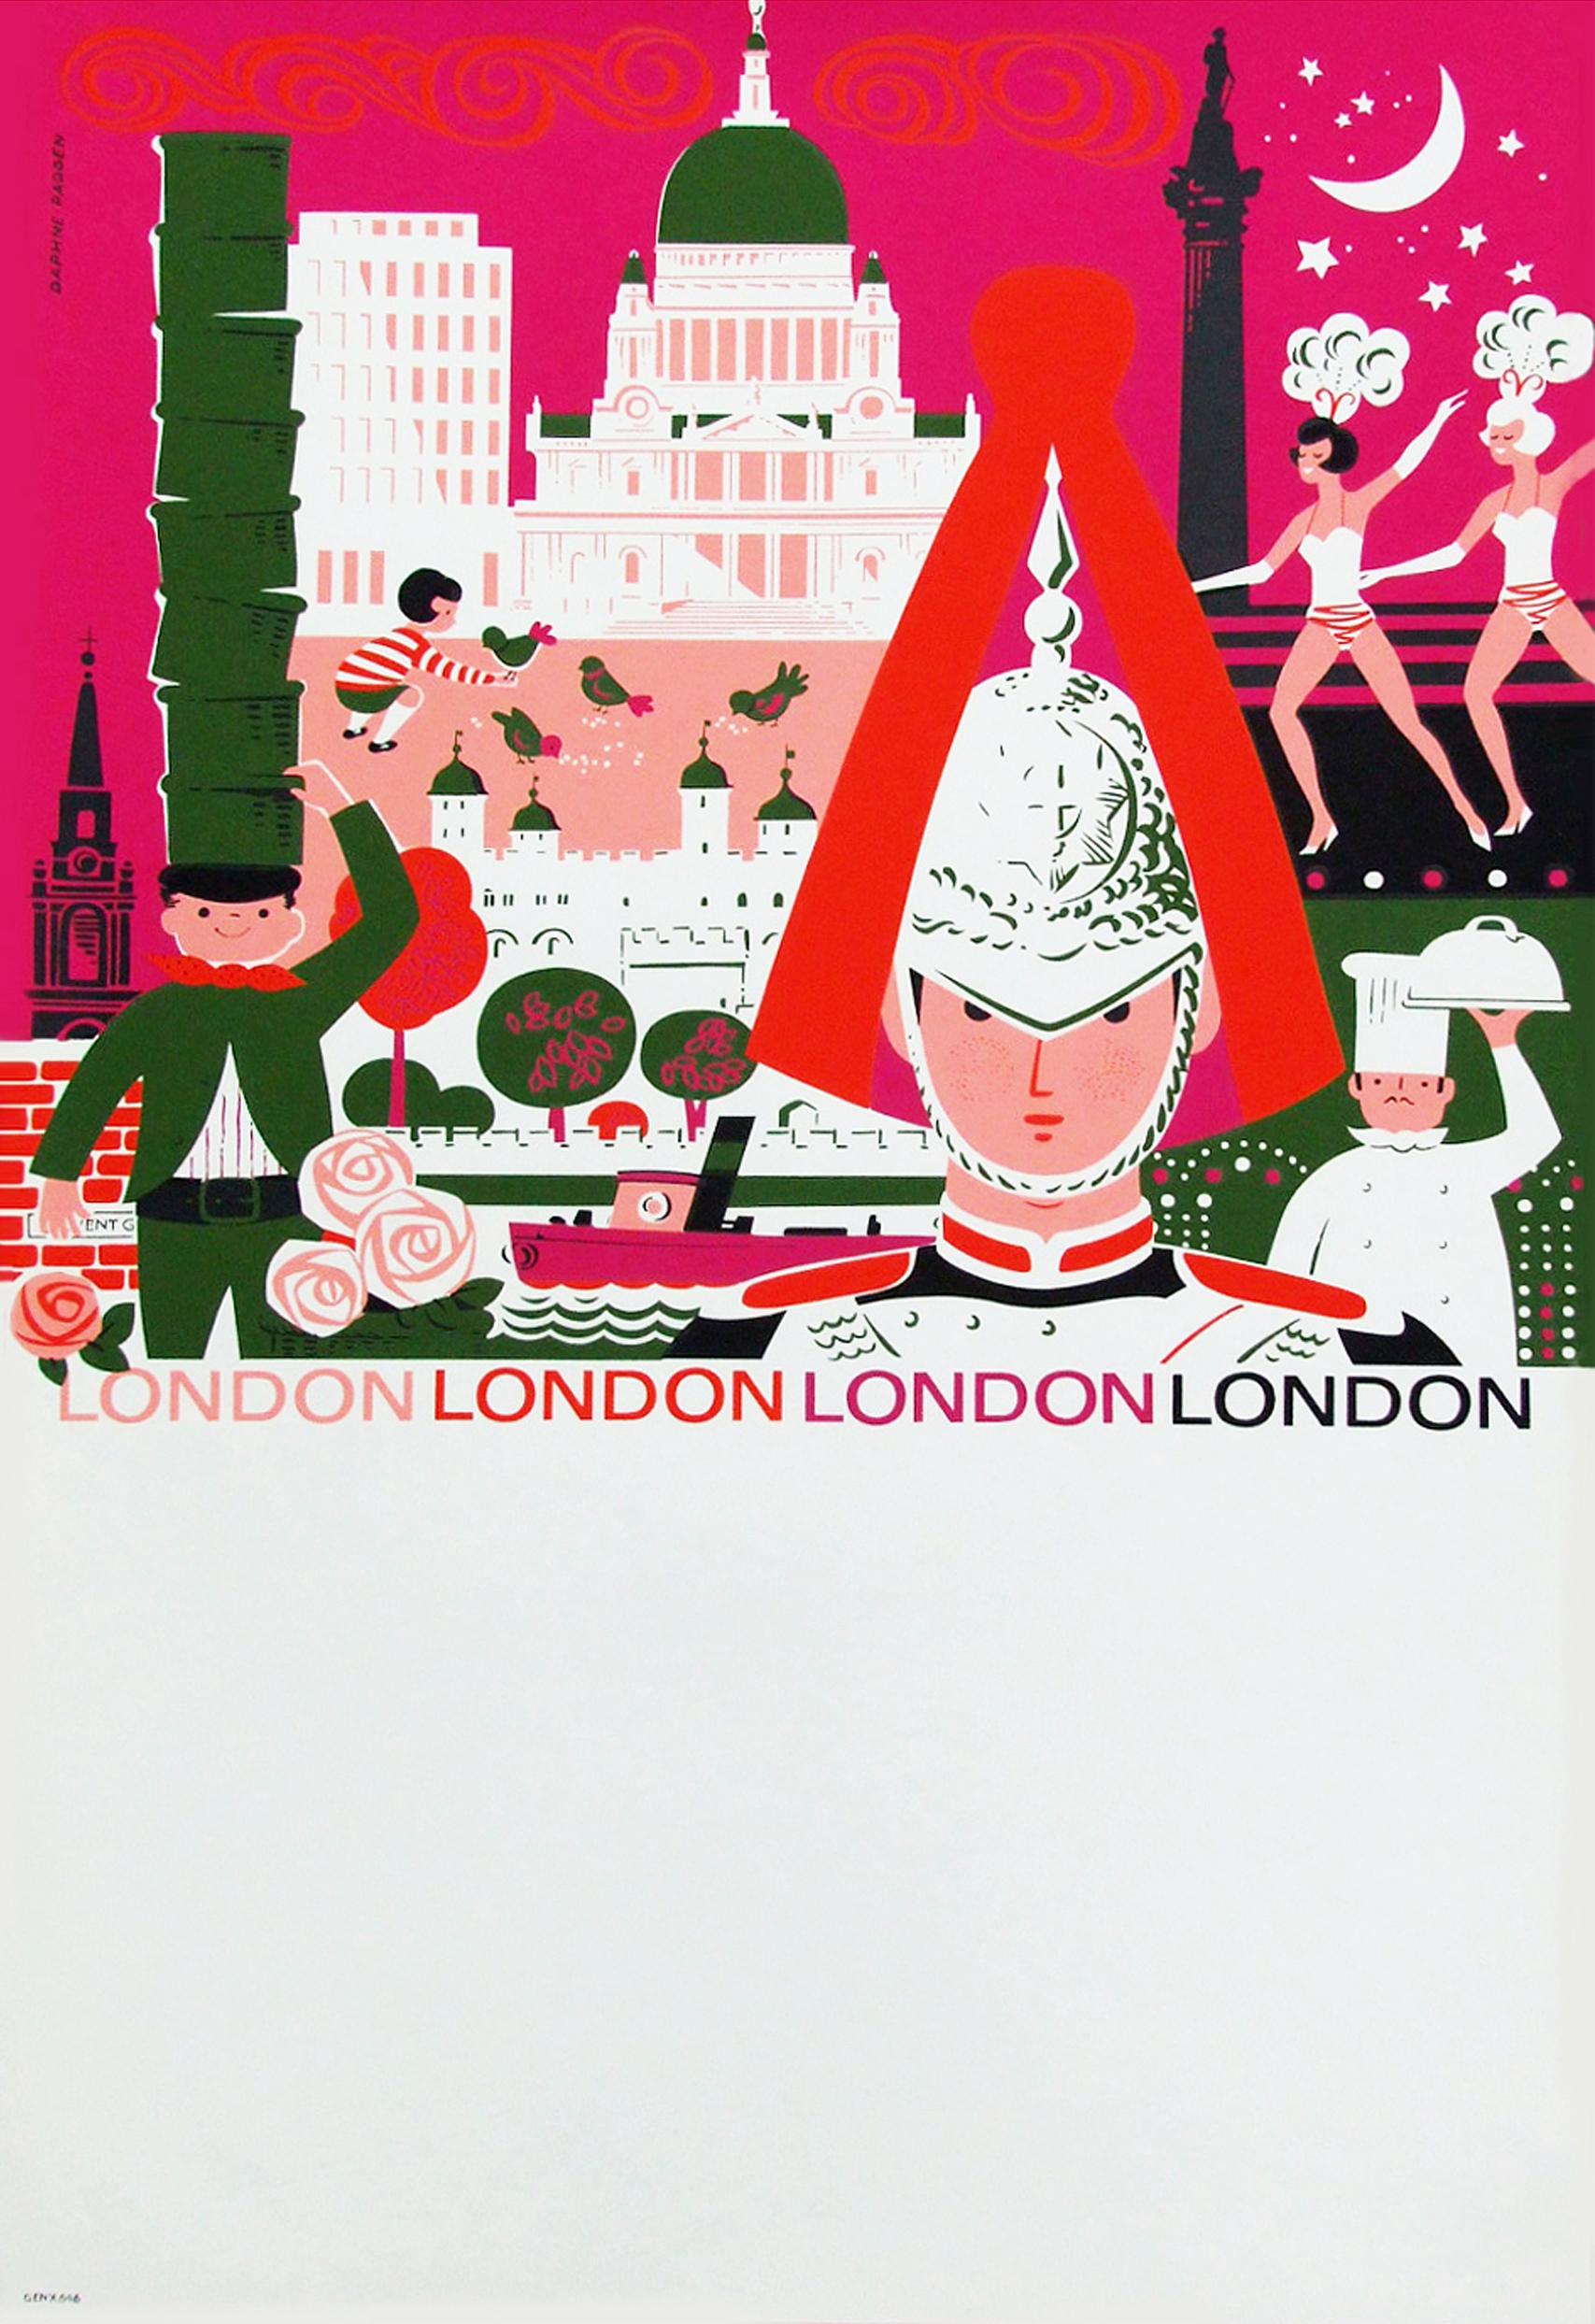 Original 1960s promotional travel poster designed by Daphne Padden for United Buses, UK.

First edition color offset lithograph.

Rolled.

Measures: L 76cm x W 50.7cm.